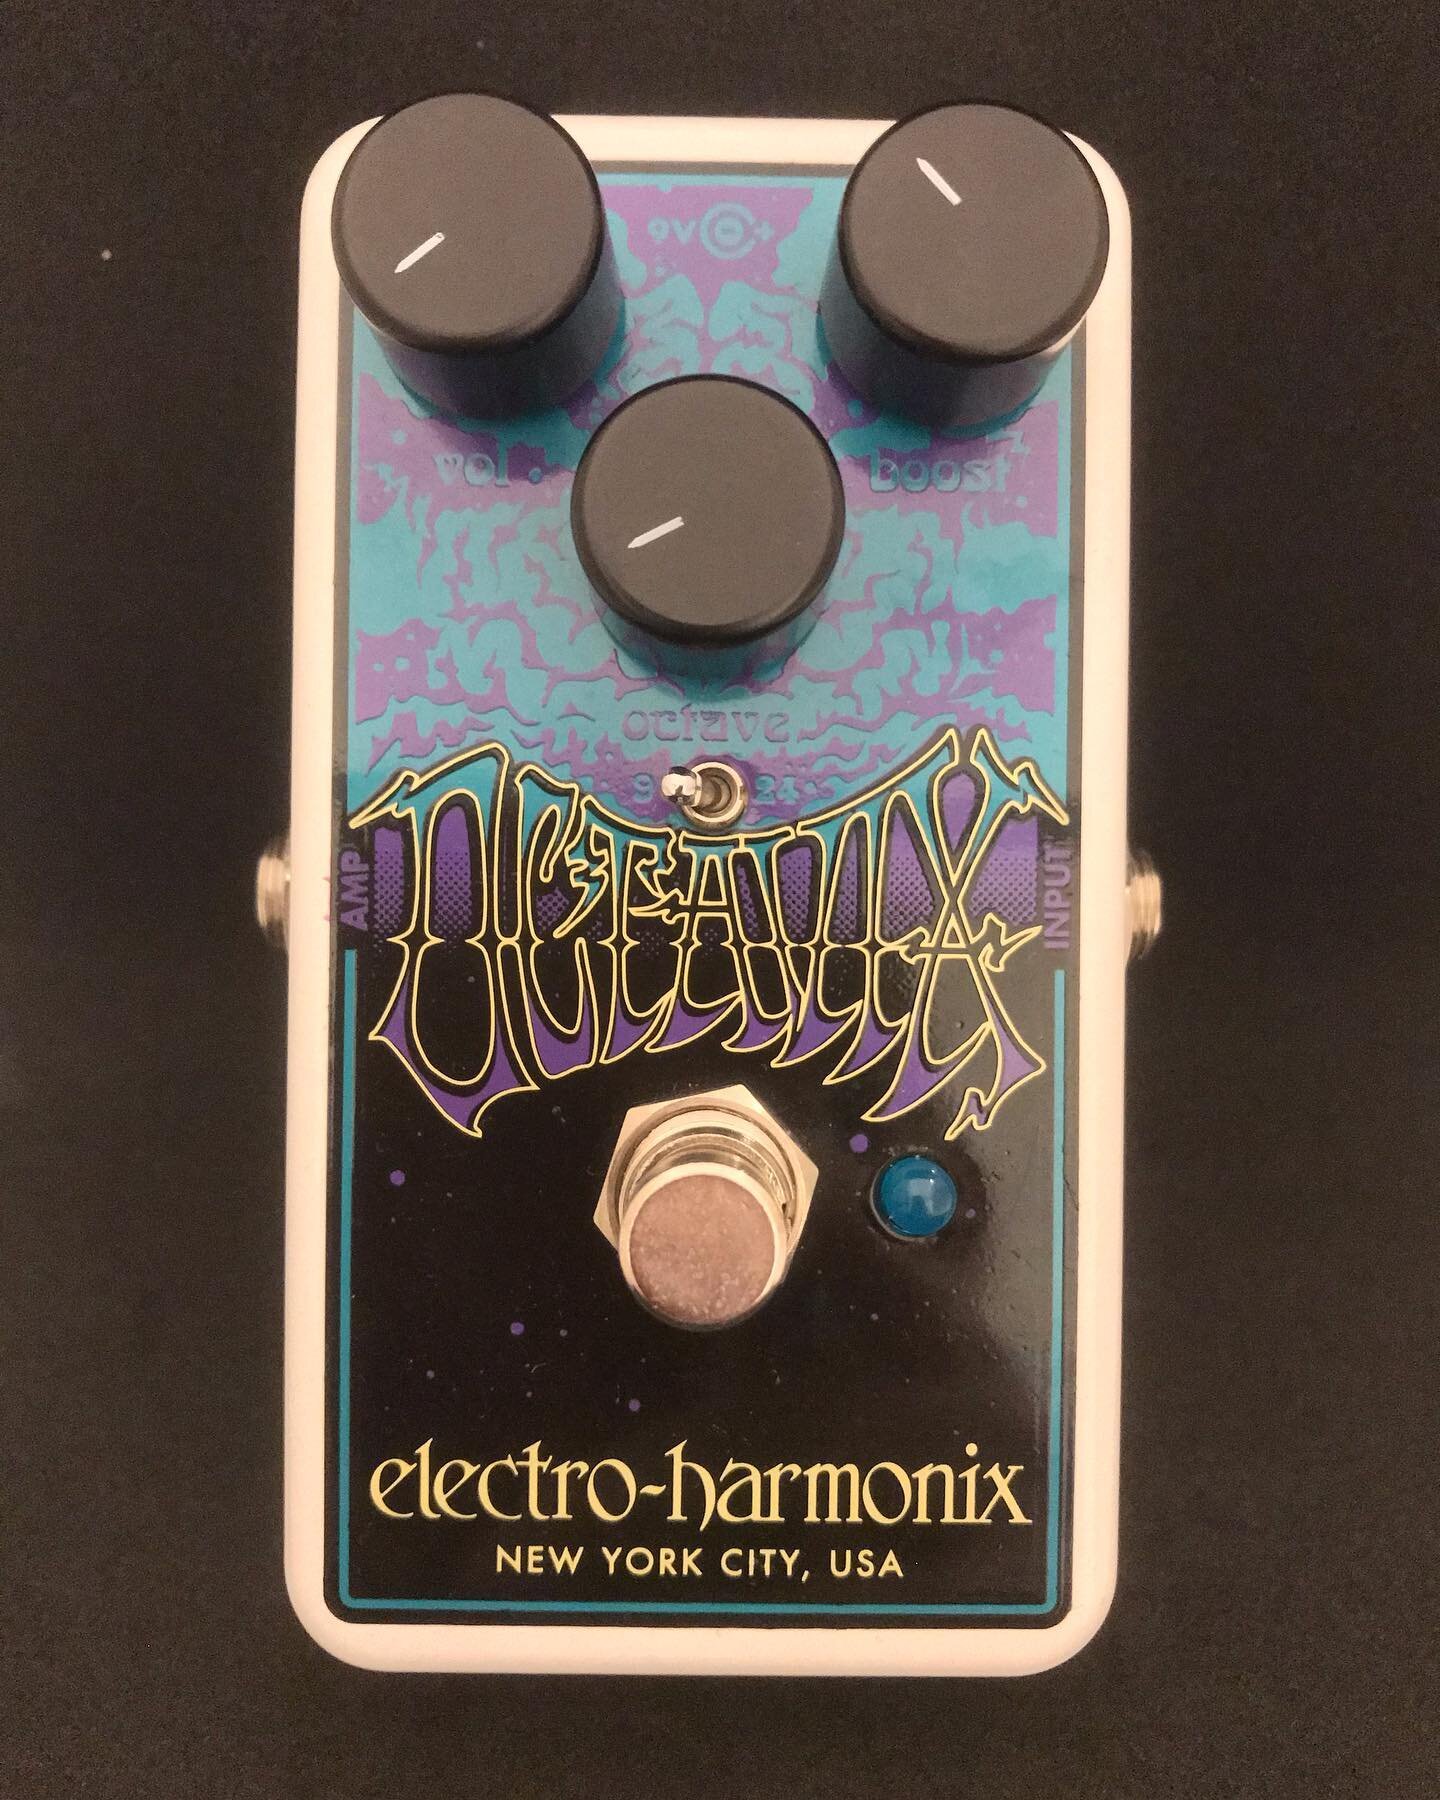 Electro-Harmonix Octavix Octave Fuzz 😎😎😎
&bull;
&bull;
The EHX Octavix Octave Fuzz delivers the definitive late 1960&rsquo;s fuzzed out, octave up sound together with modern enhancements that update the classic concept. Housed in EHX&rsquo;s rugge